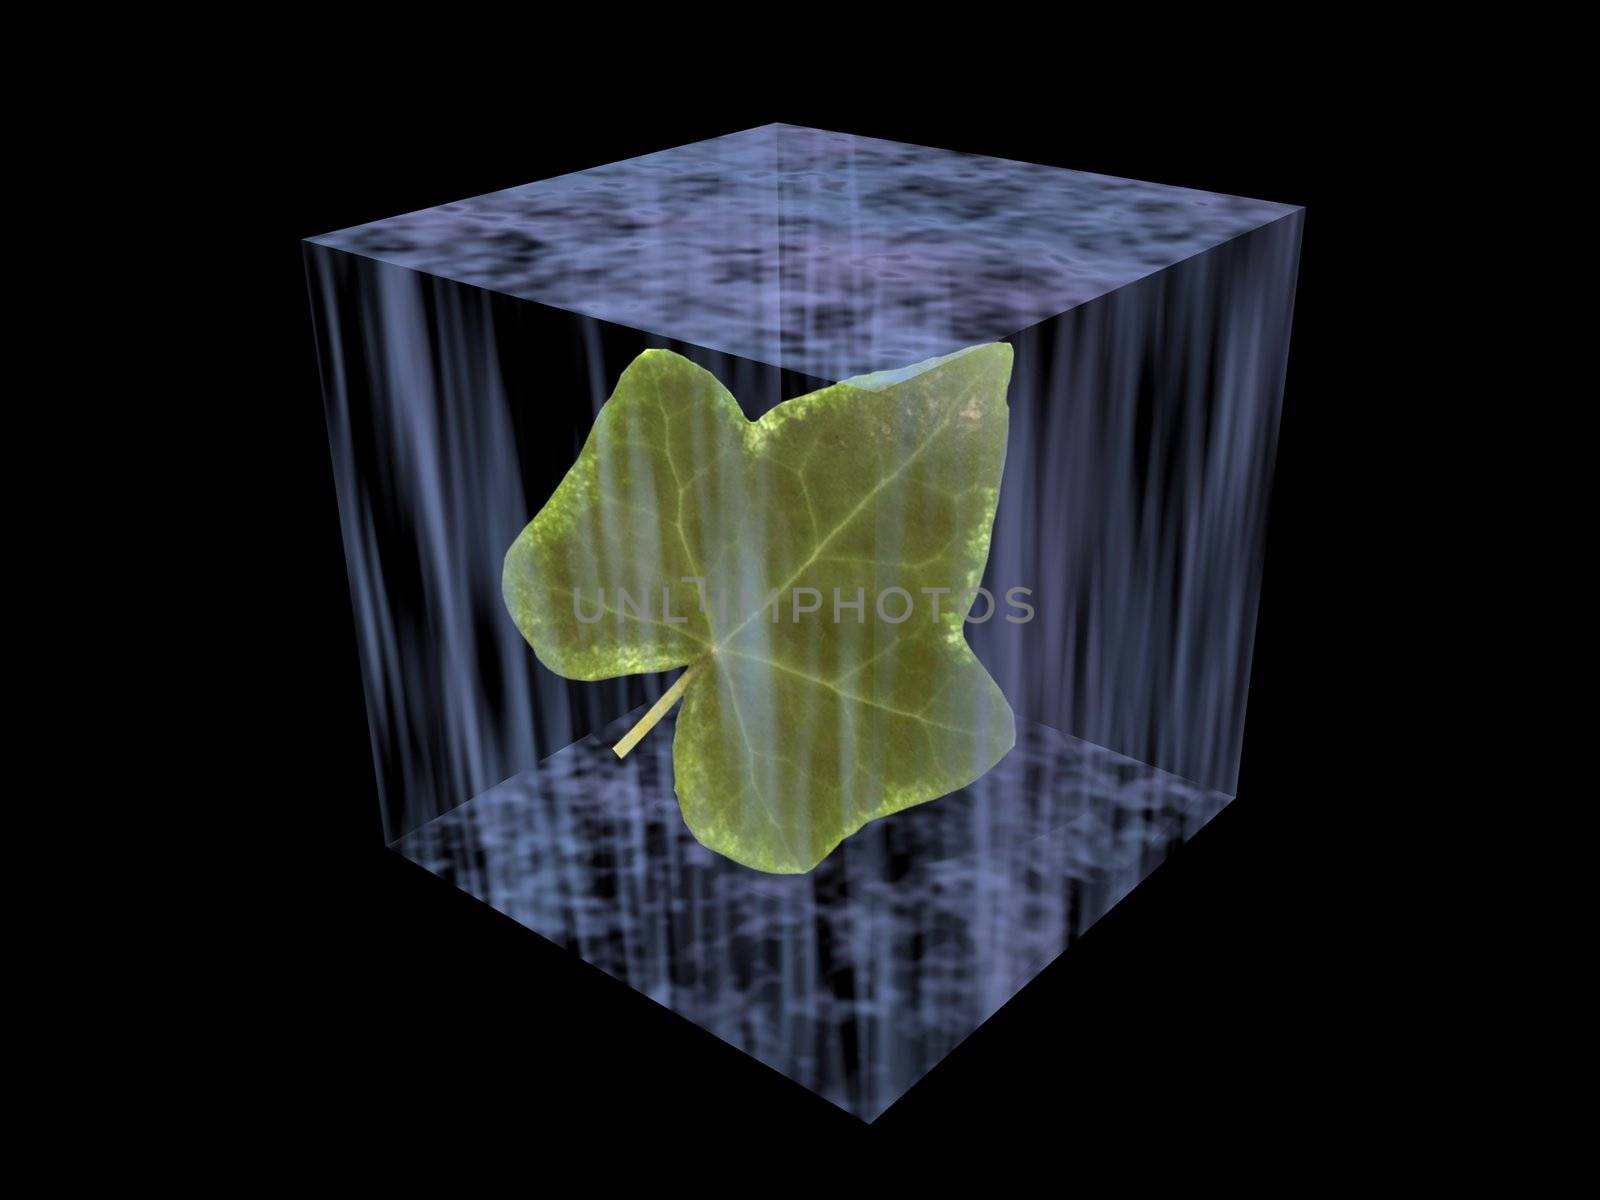 The frozen green leaf in a cube of an ice